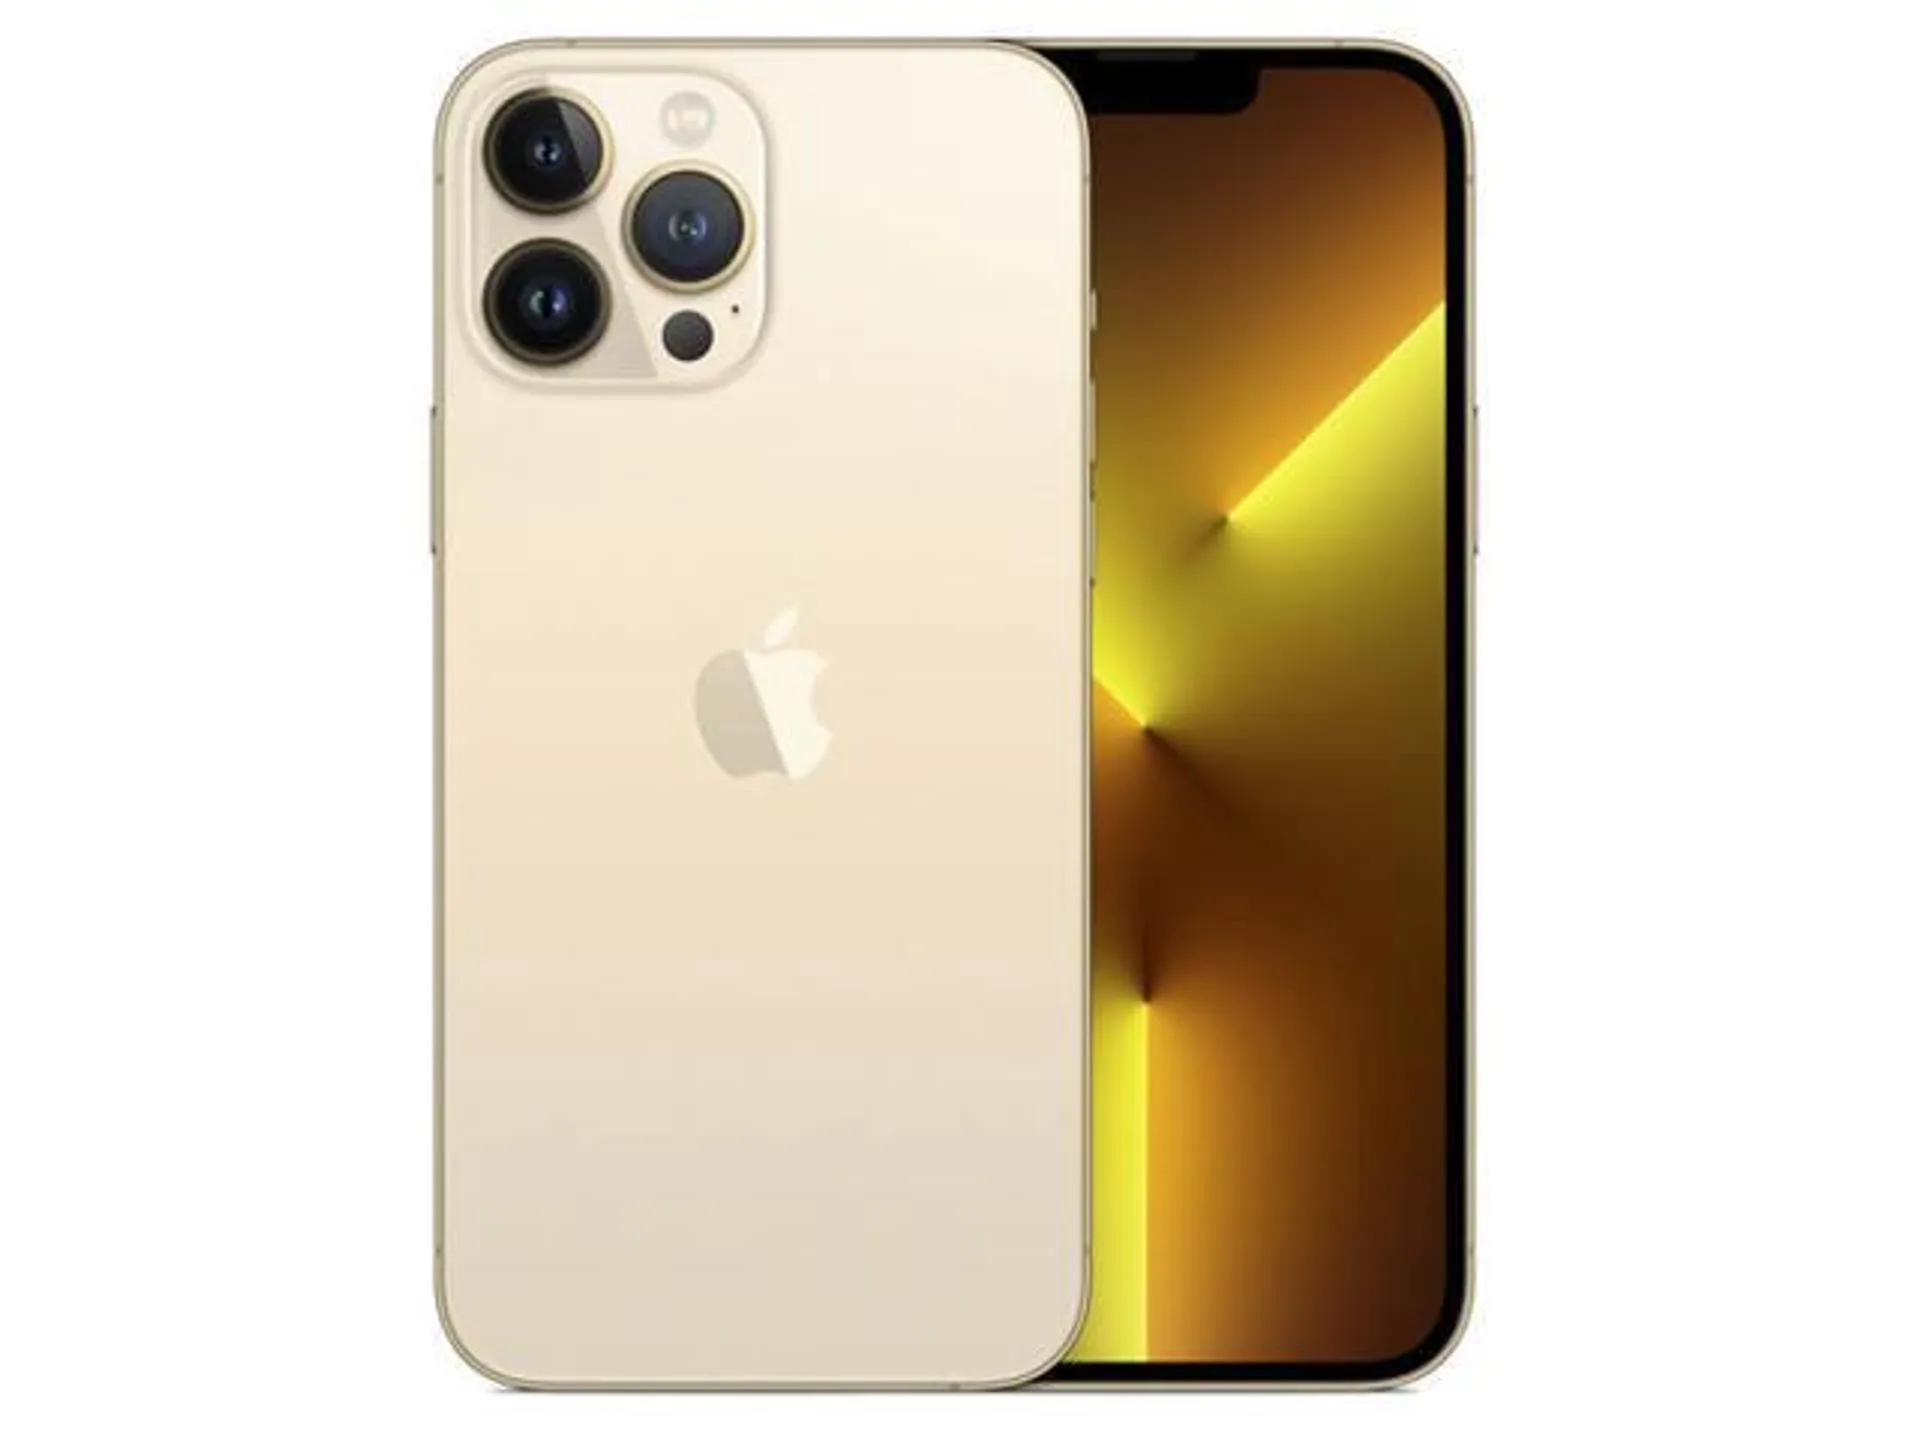 Apple iPhone 13 Pro Max 128GB - Gold - MLKN3LL/A - Grade A (Refreshed)